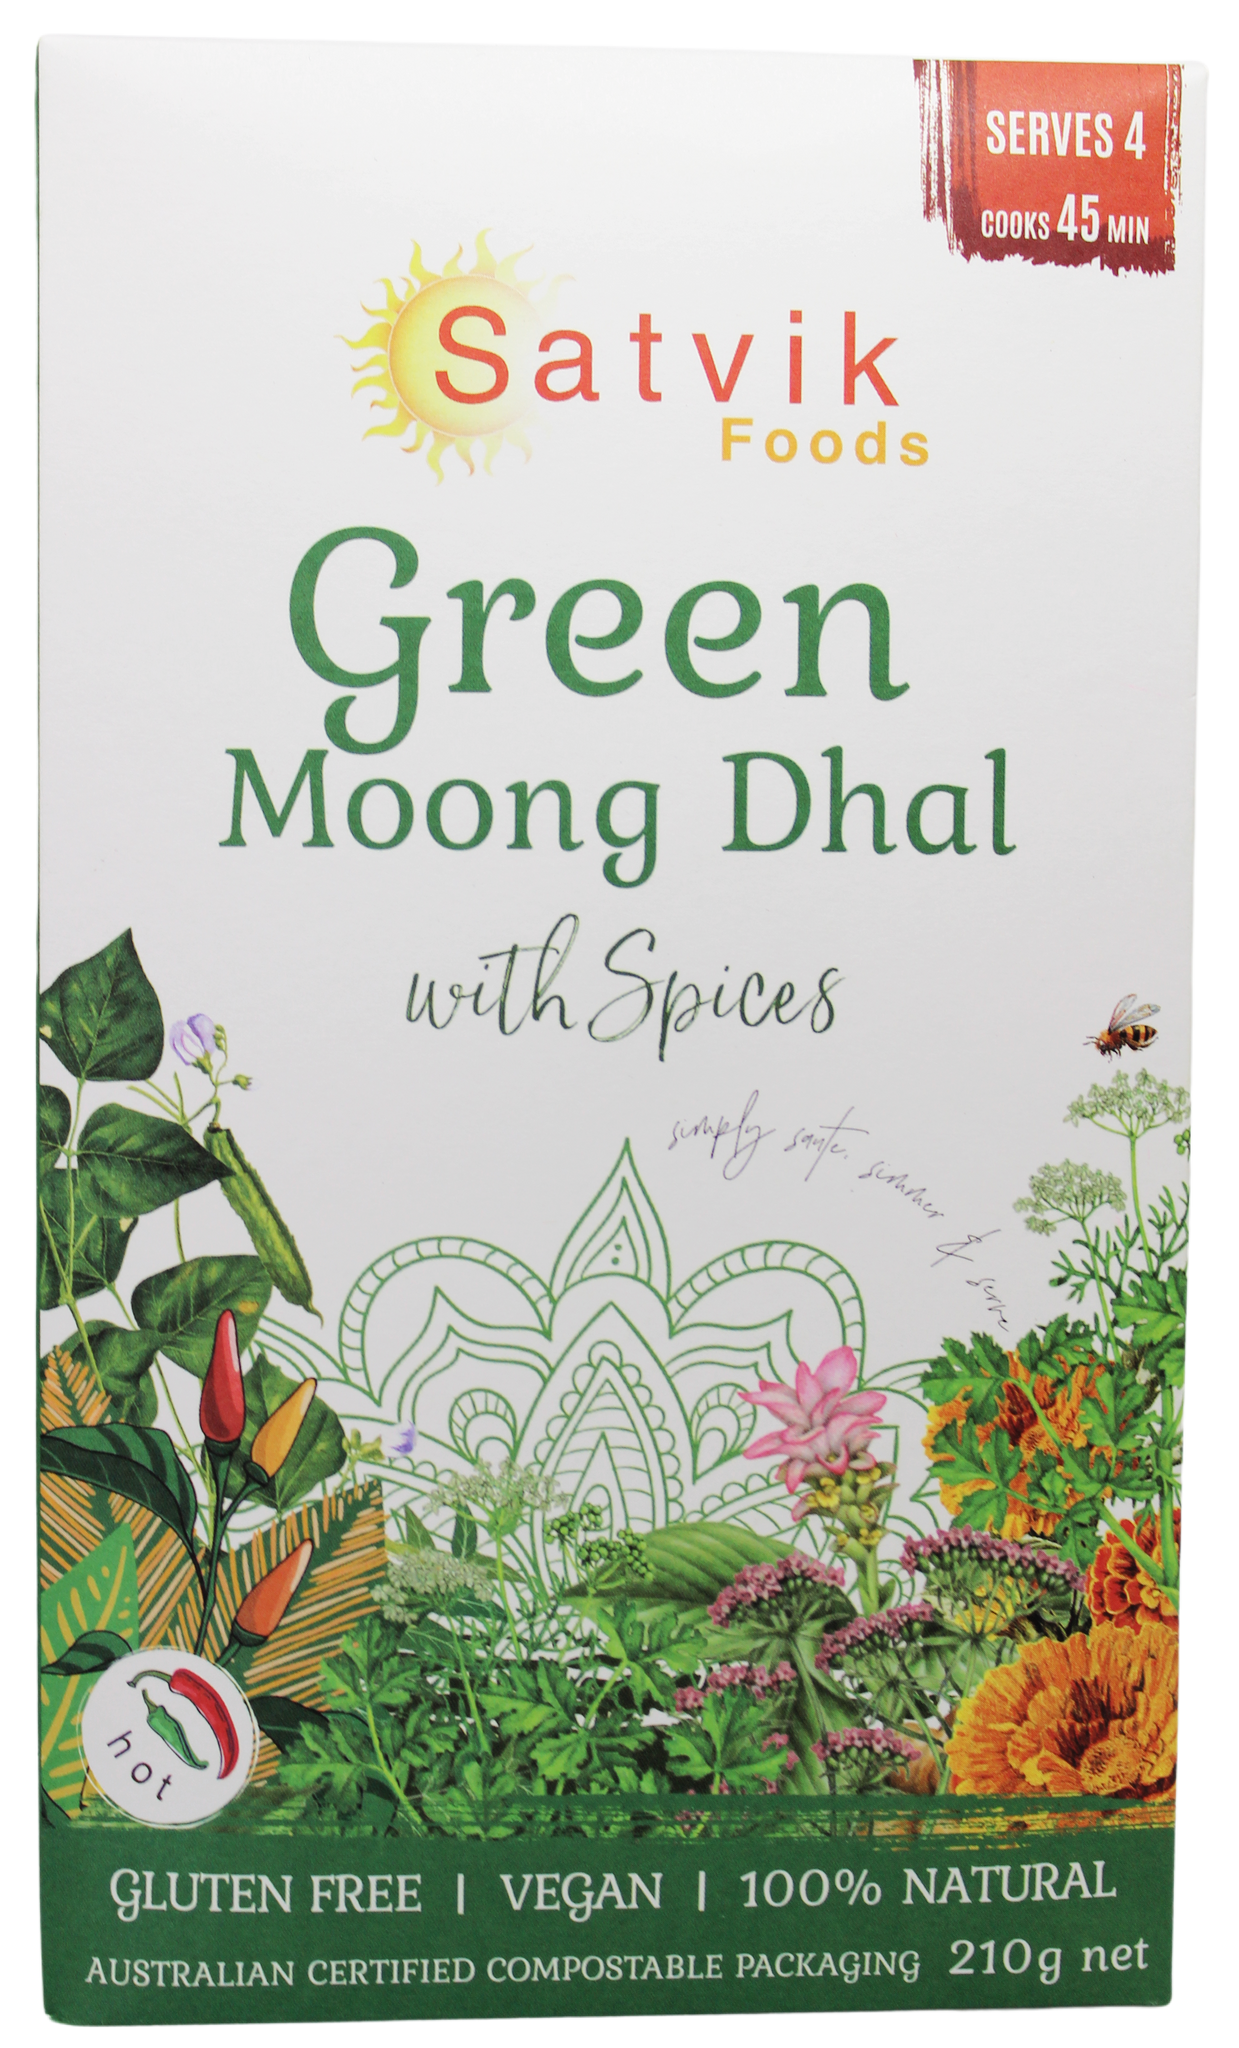 green moong dhal is beautiful presented in this hand drawn home compostable box. each pack features the flowering herbs and spices of that recipe. This easy meal is a one pot wonder and contains green mung beans, Ayurvedic spice blend and some organic sea salt. the product packaging is completely home compostable